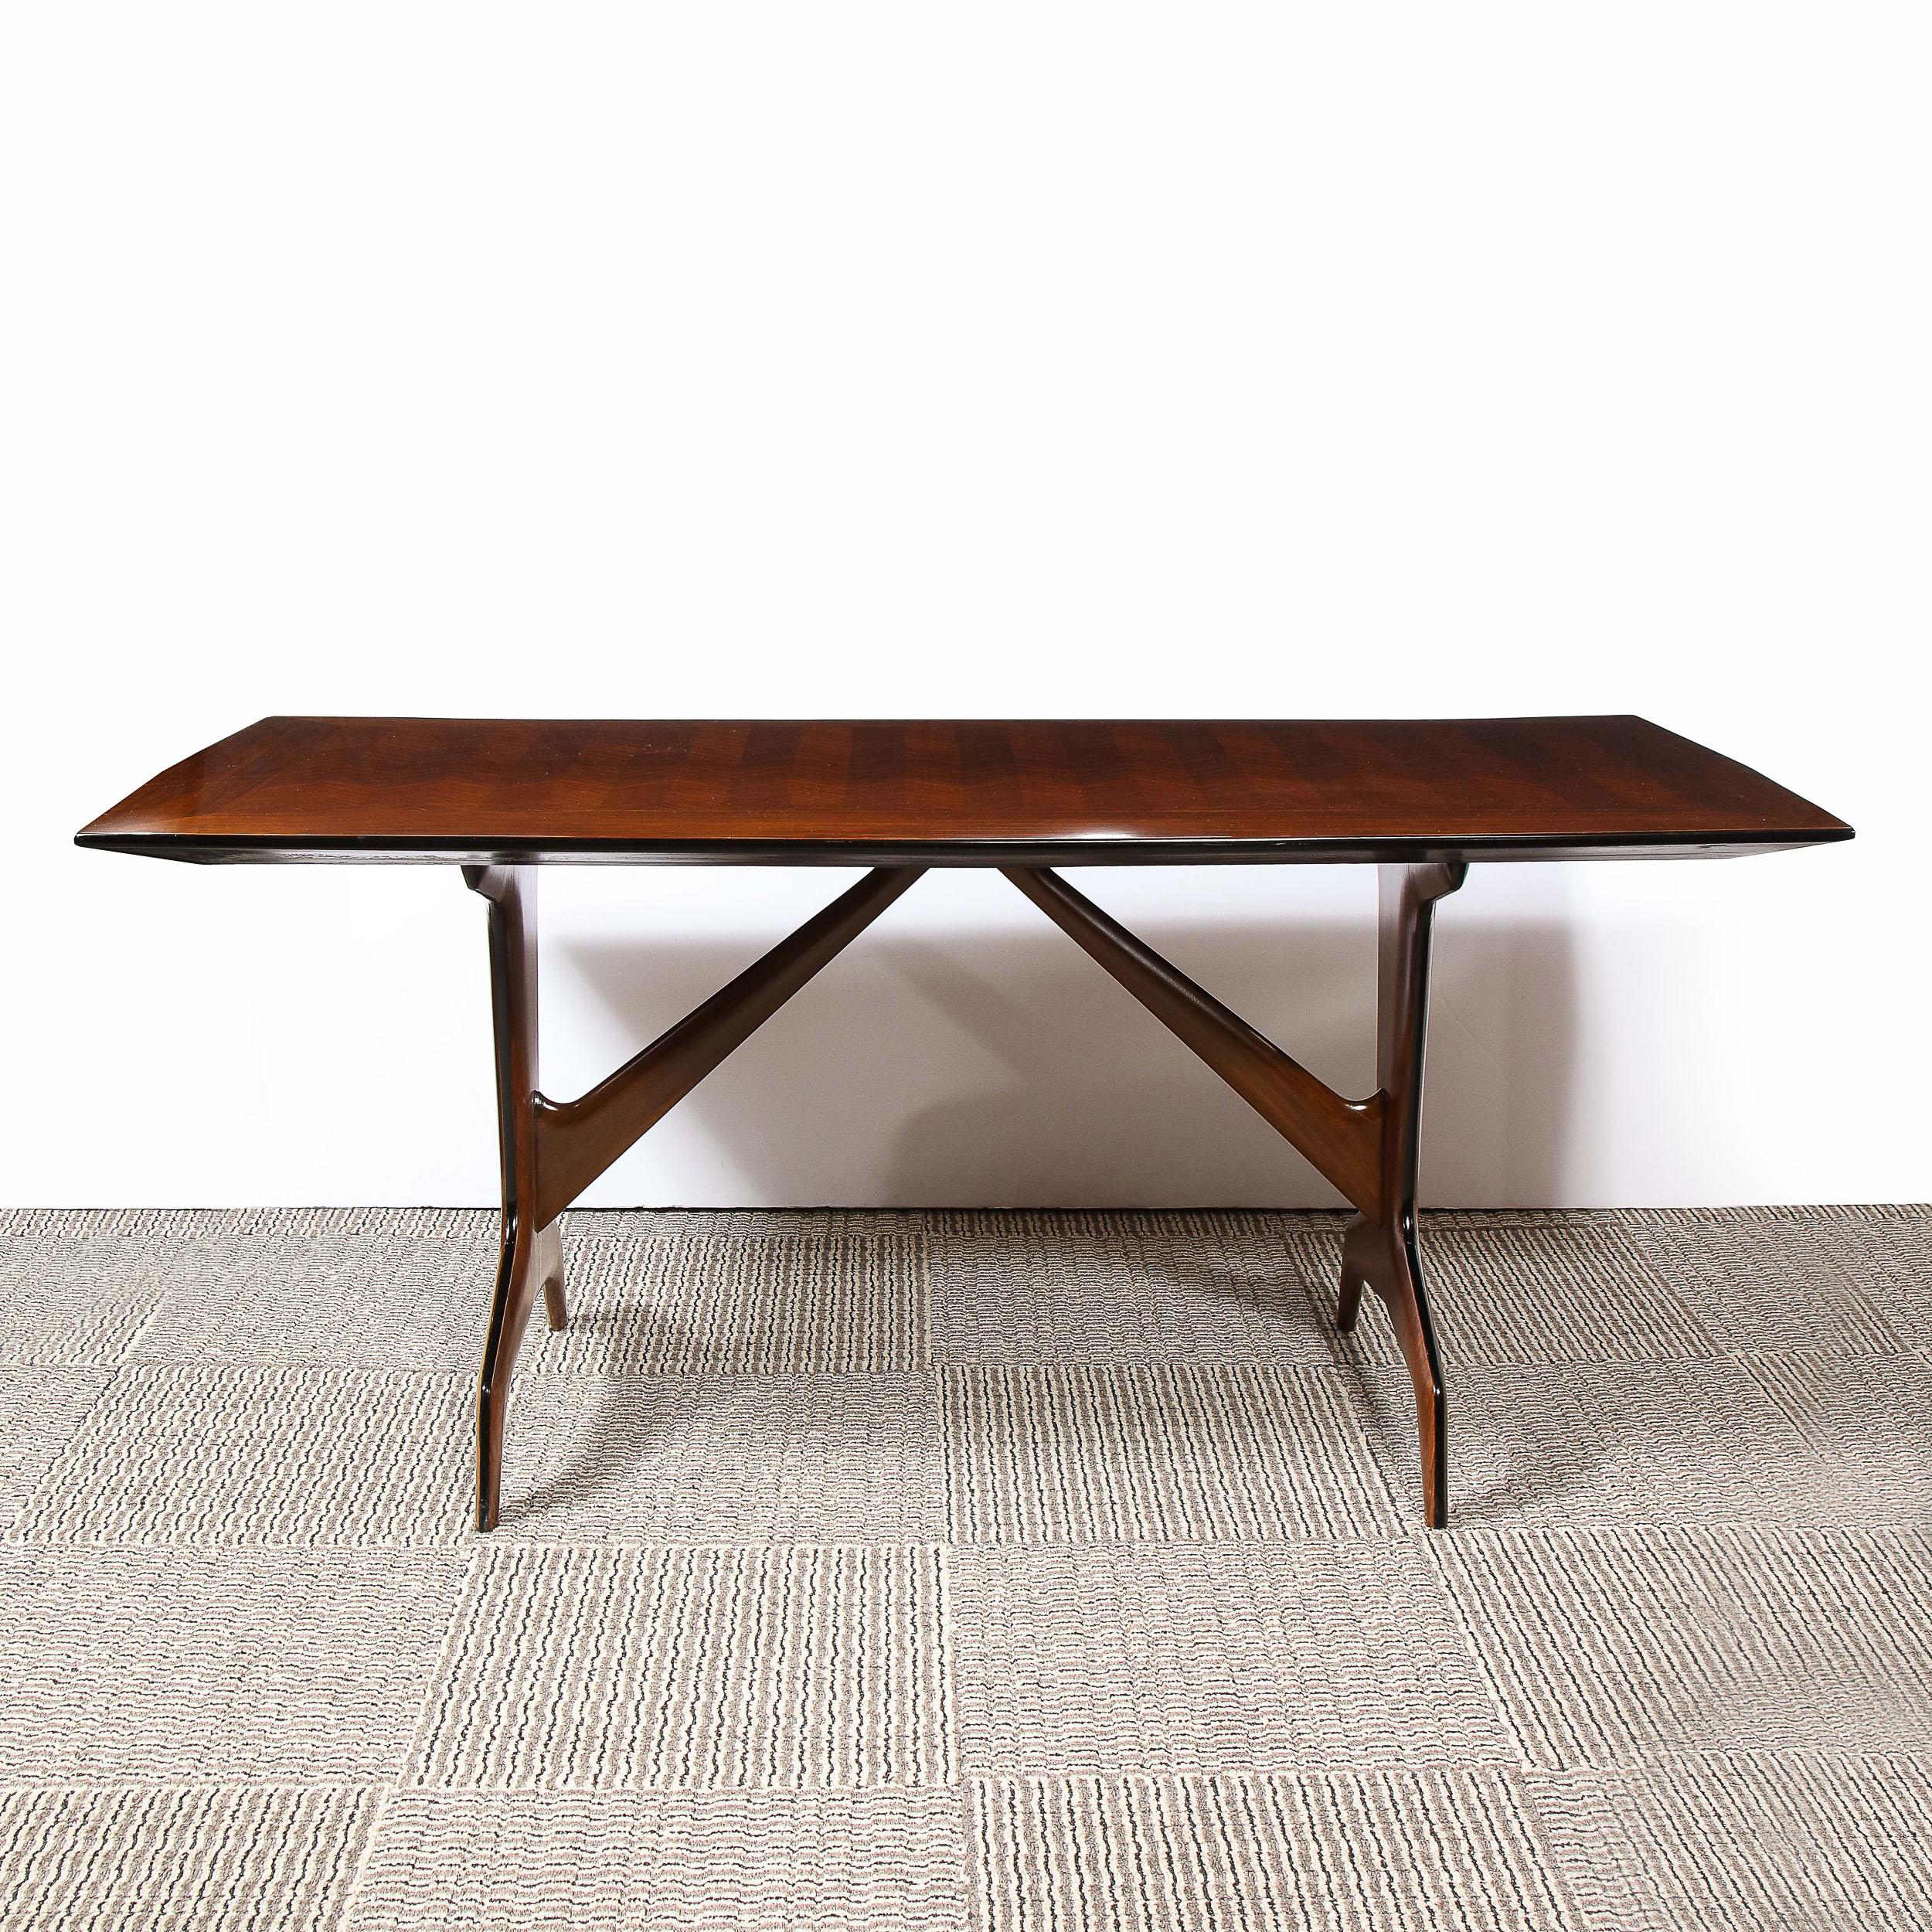 This stunning Mid Century Modern dining table was realized by the legendary designer Carlo De Carli in Italy, circa 1950. It features a graphic and sculptural base consisting of two tapered rectangular supports that adjoin geometric arched bases